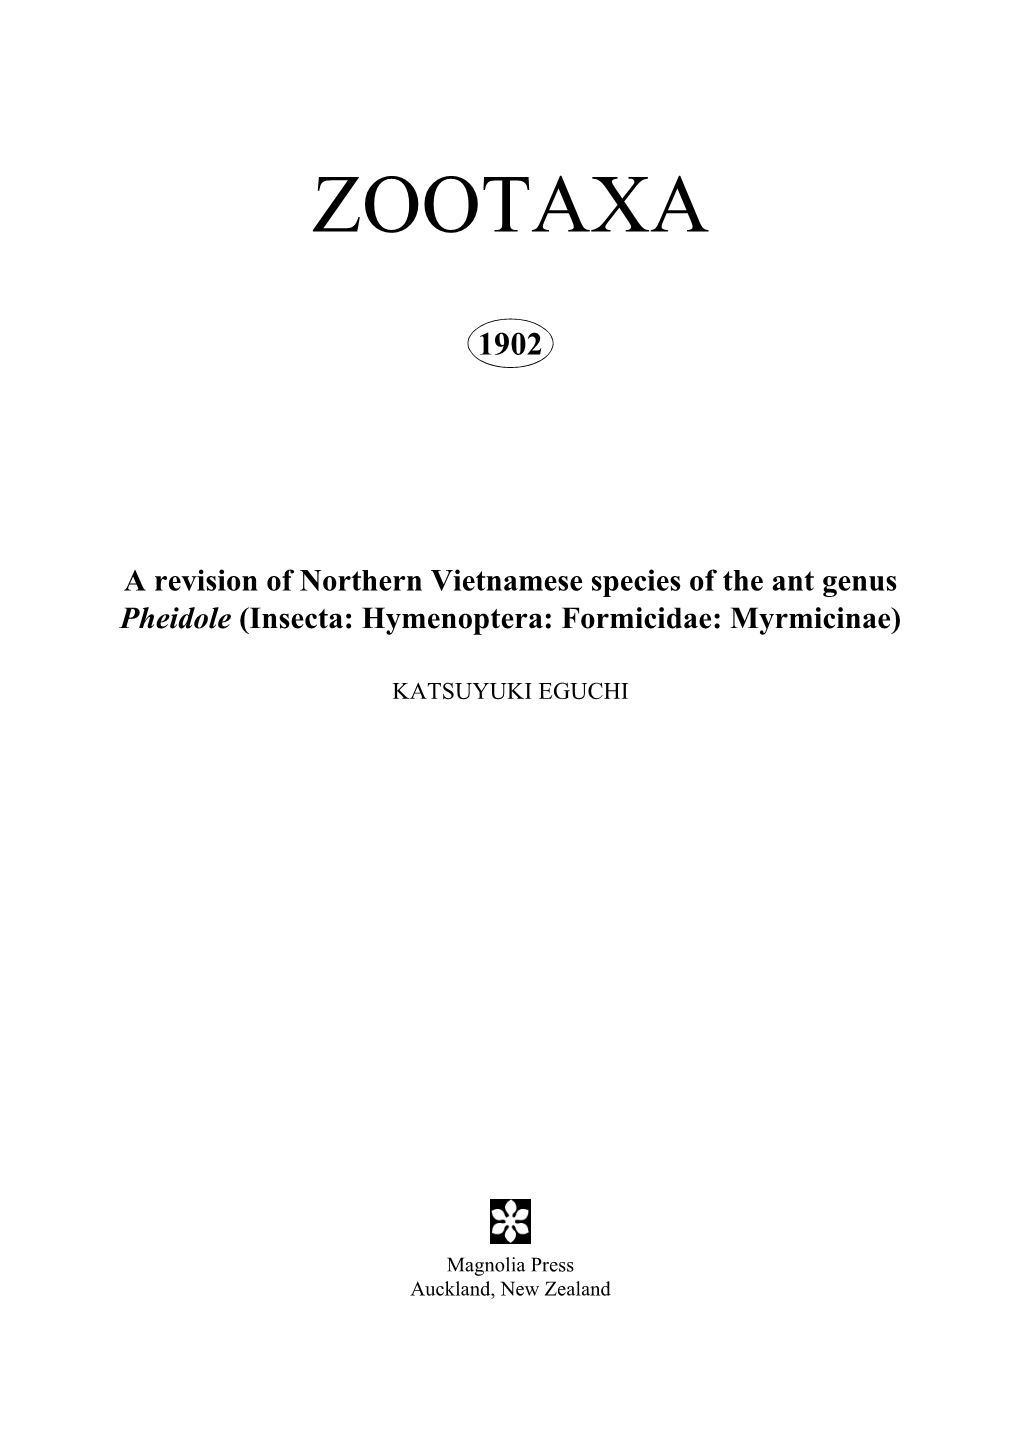 Zootaxa, a Revision of Northern Vietnamese Species of the Ant Genus